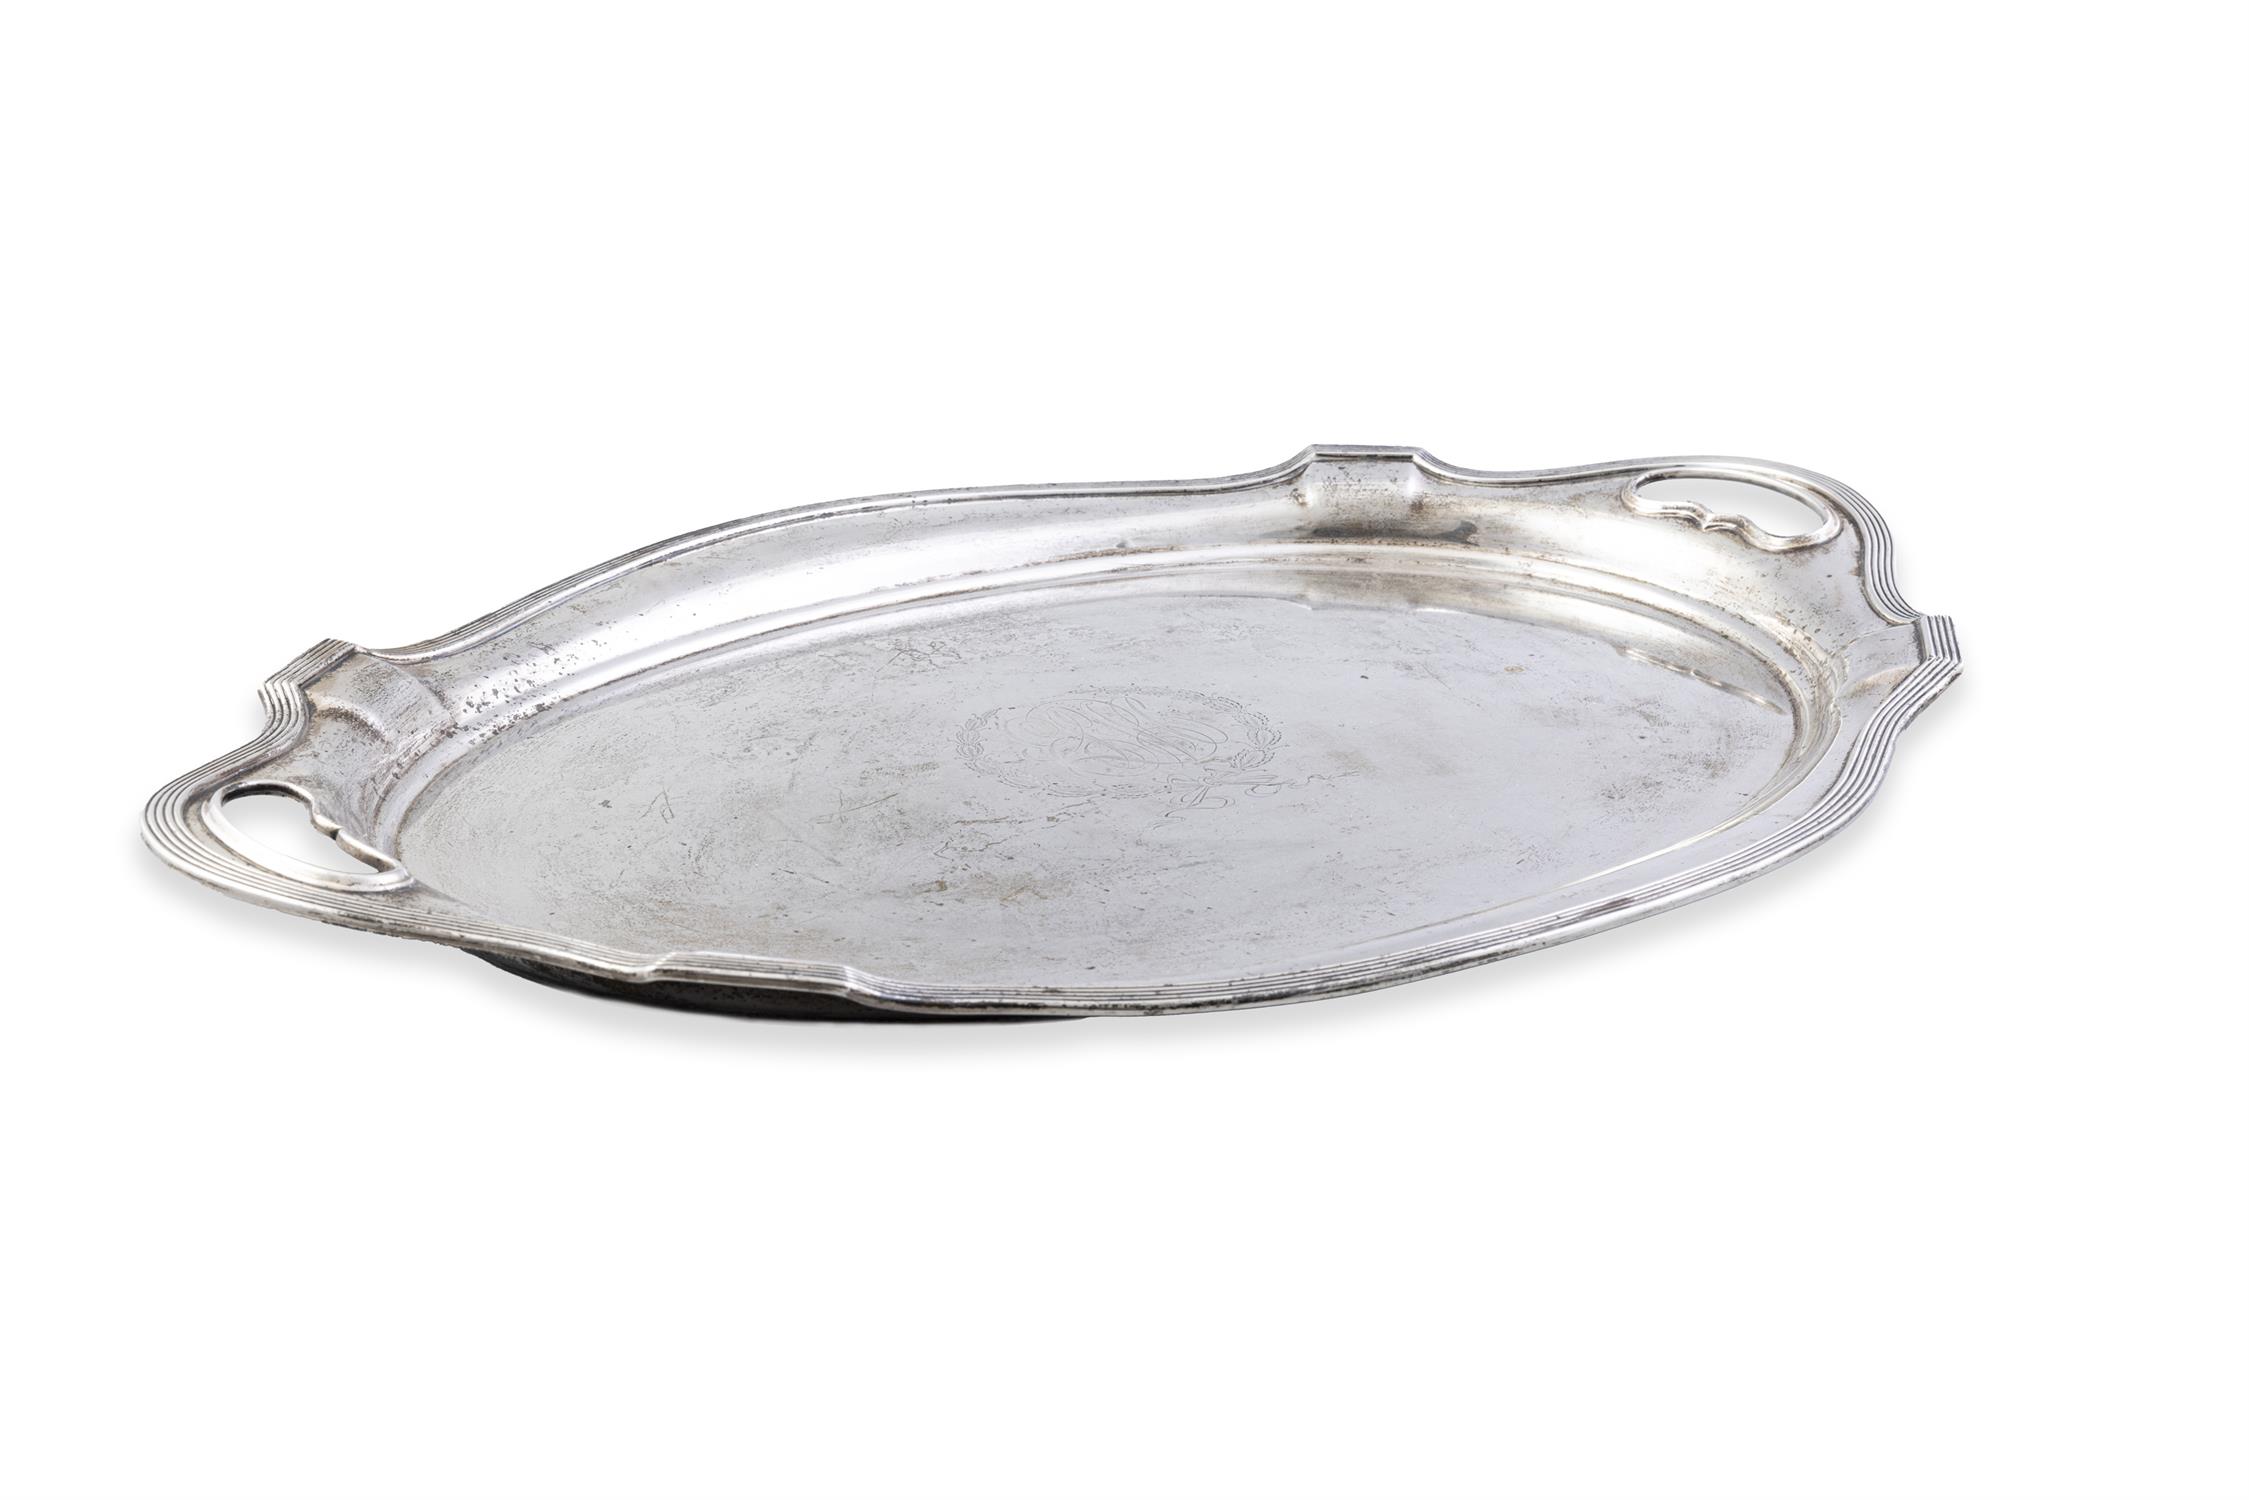 A LARGE AMERICAN SILVER TWO HANDLED SERVING TRAY retailers mark for 'J.E. Caldwell & Co. - Image 2 of 5